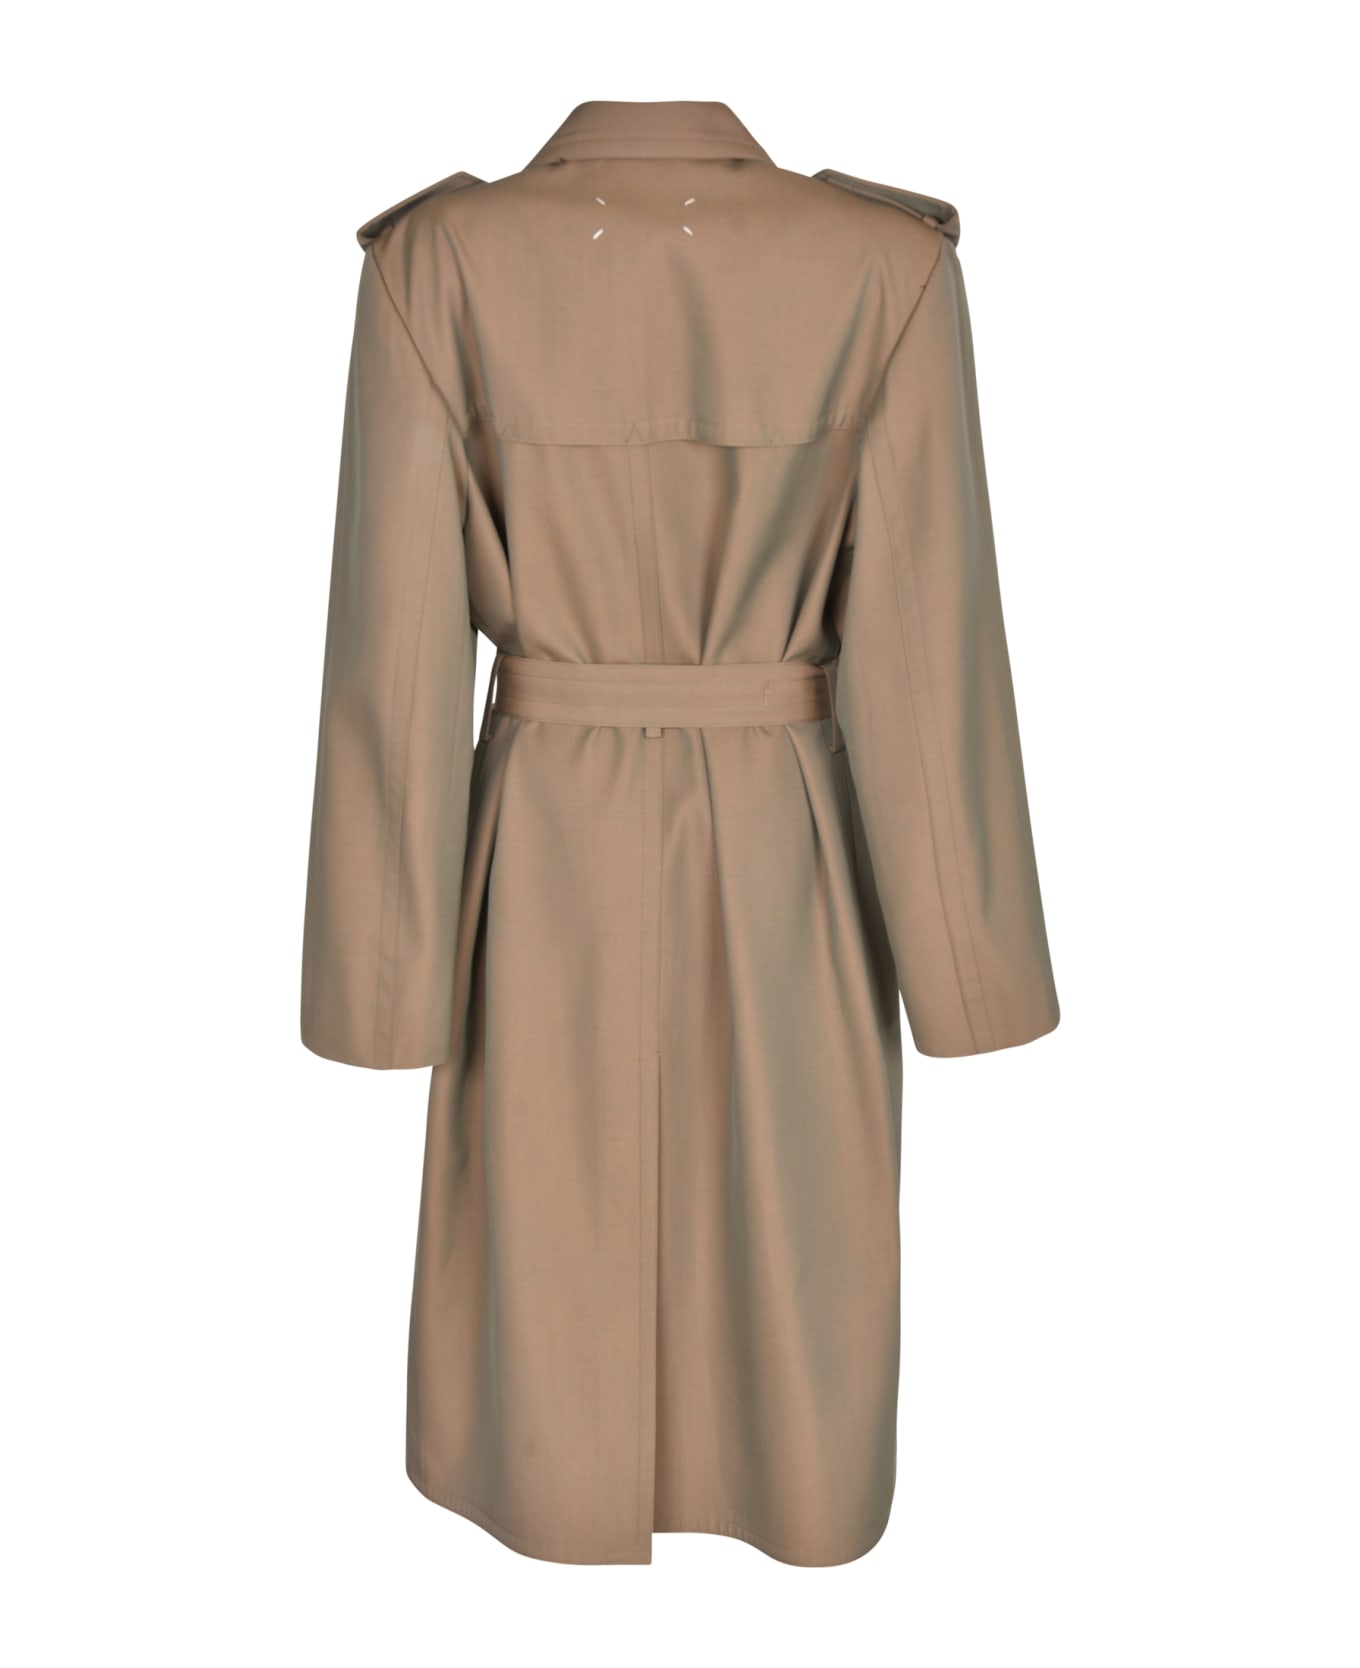 Maison Margiela Classic Belted Trench - Beige